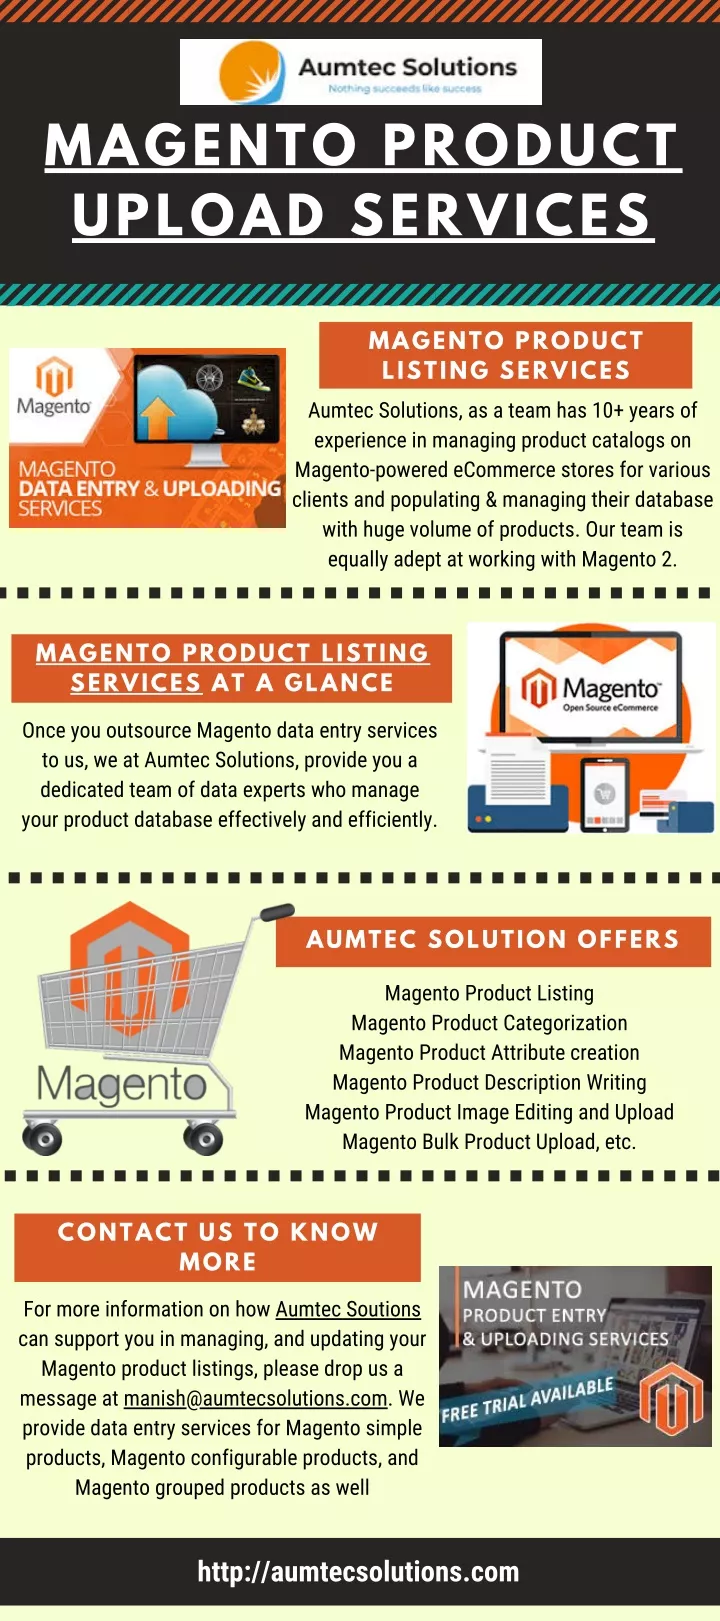 magento product upload services